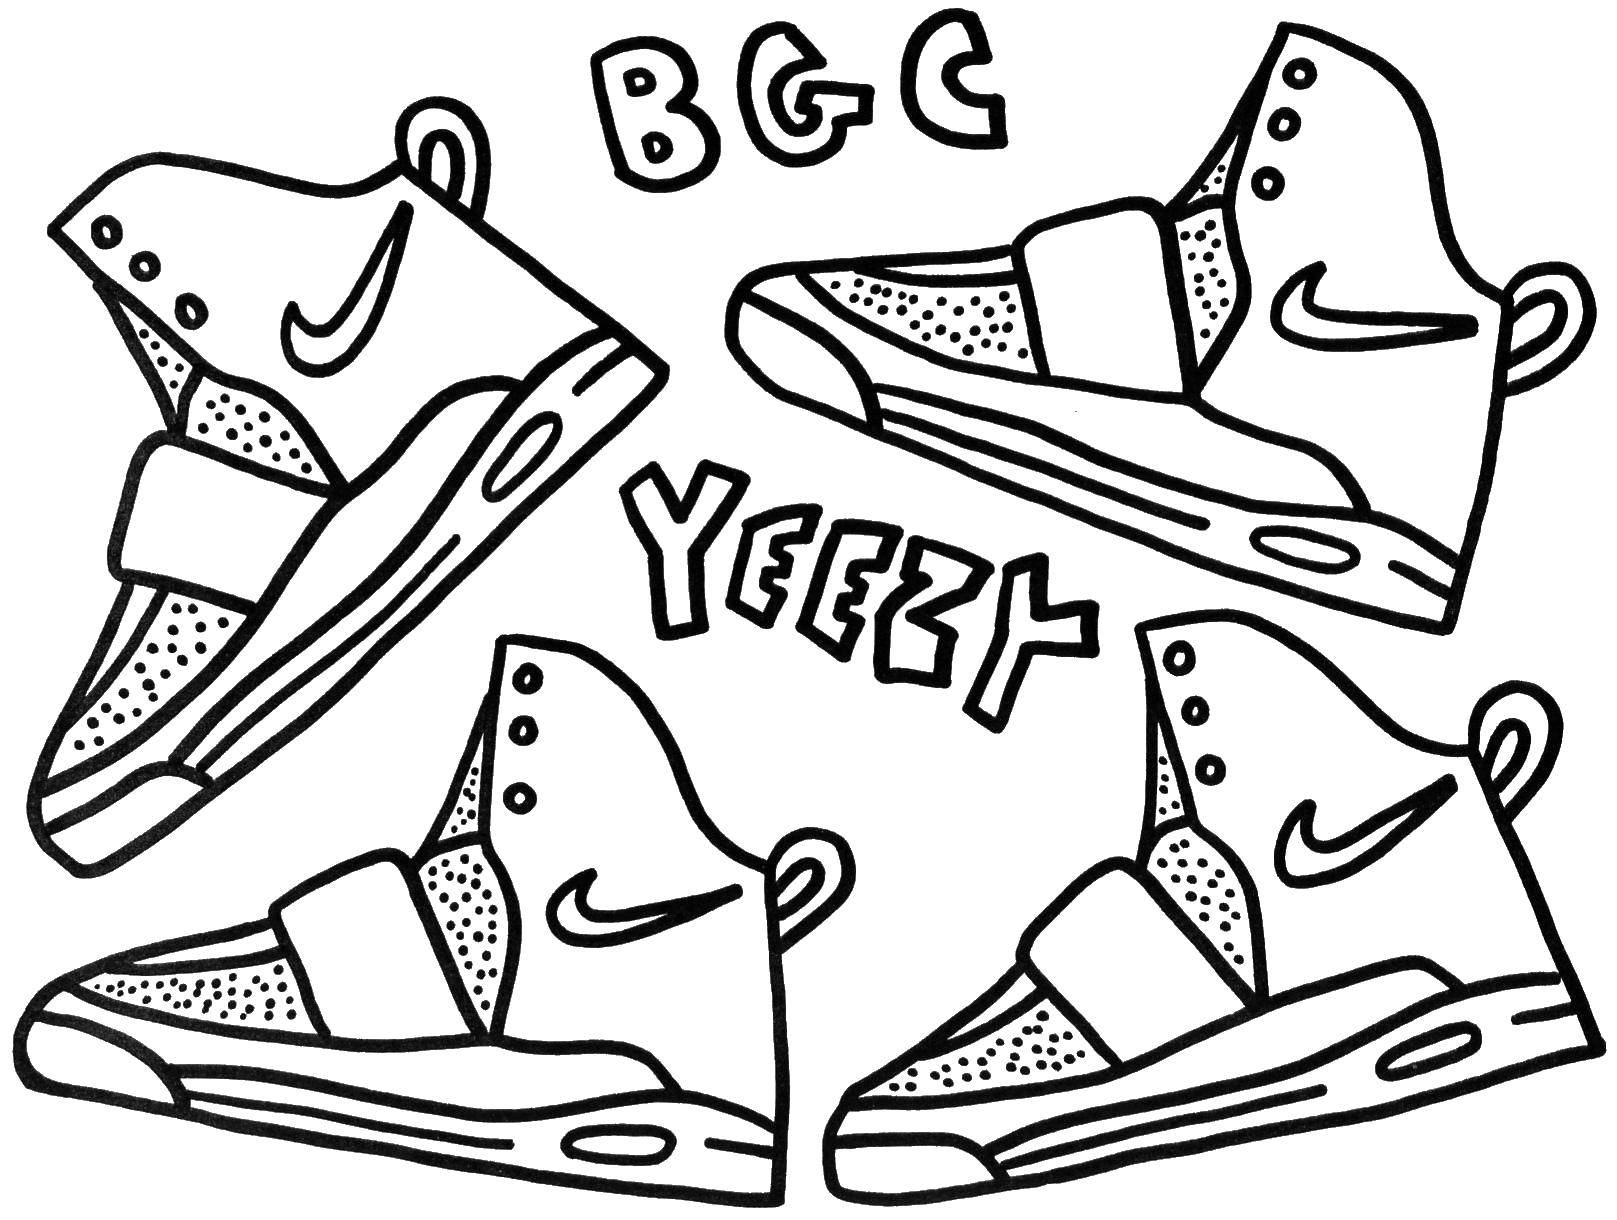 Coloring Sneakers. Category Clothing. Tags:  clothing, shoes.